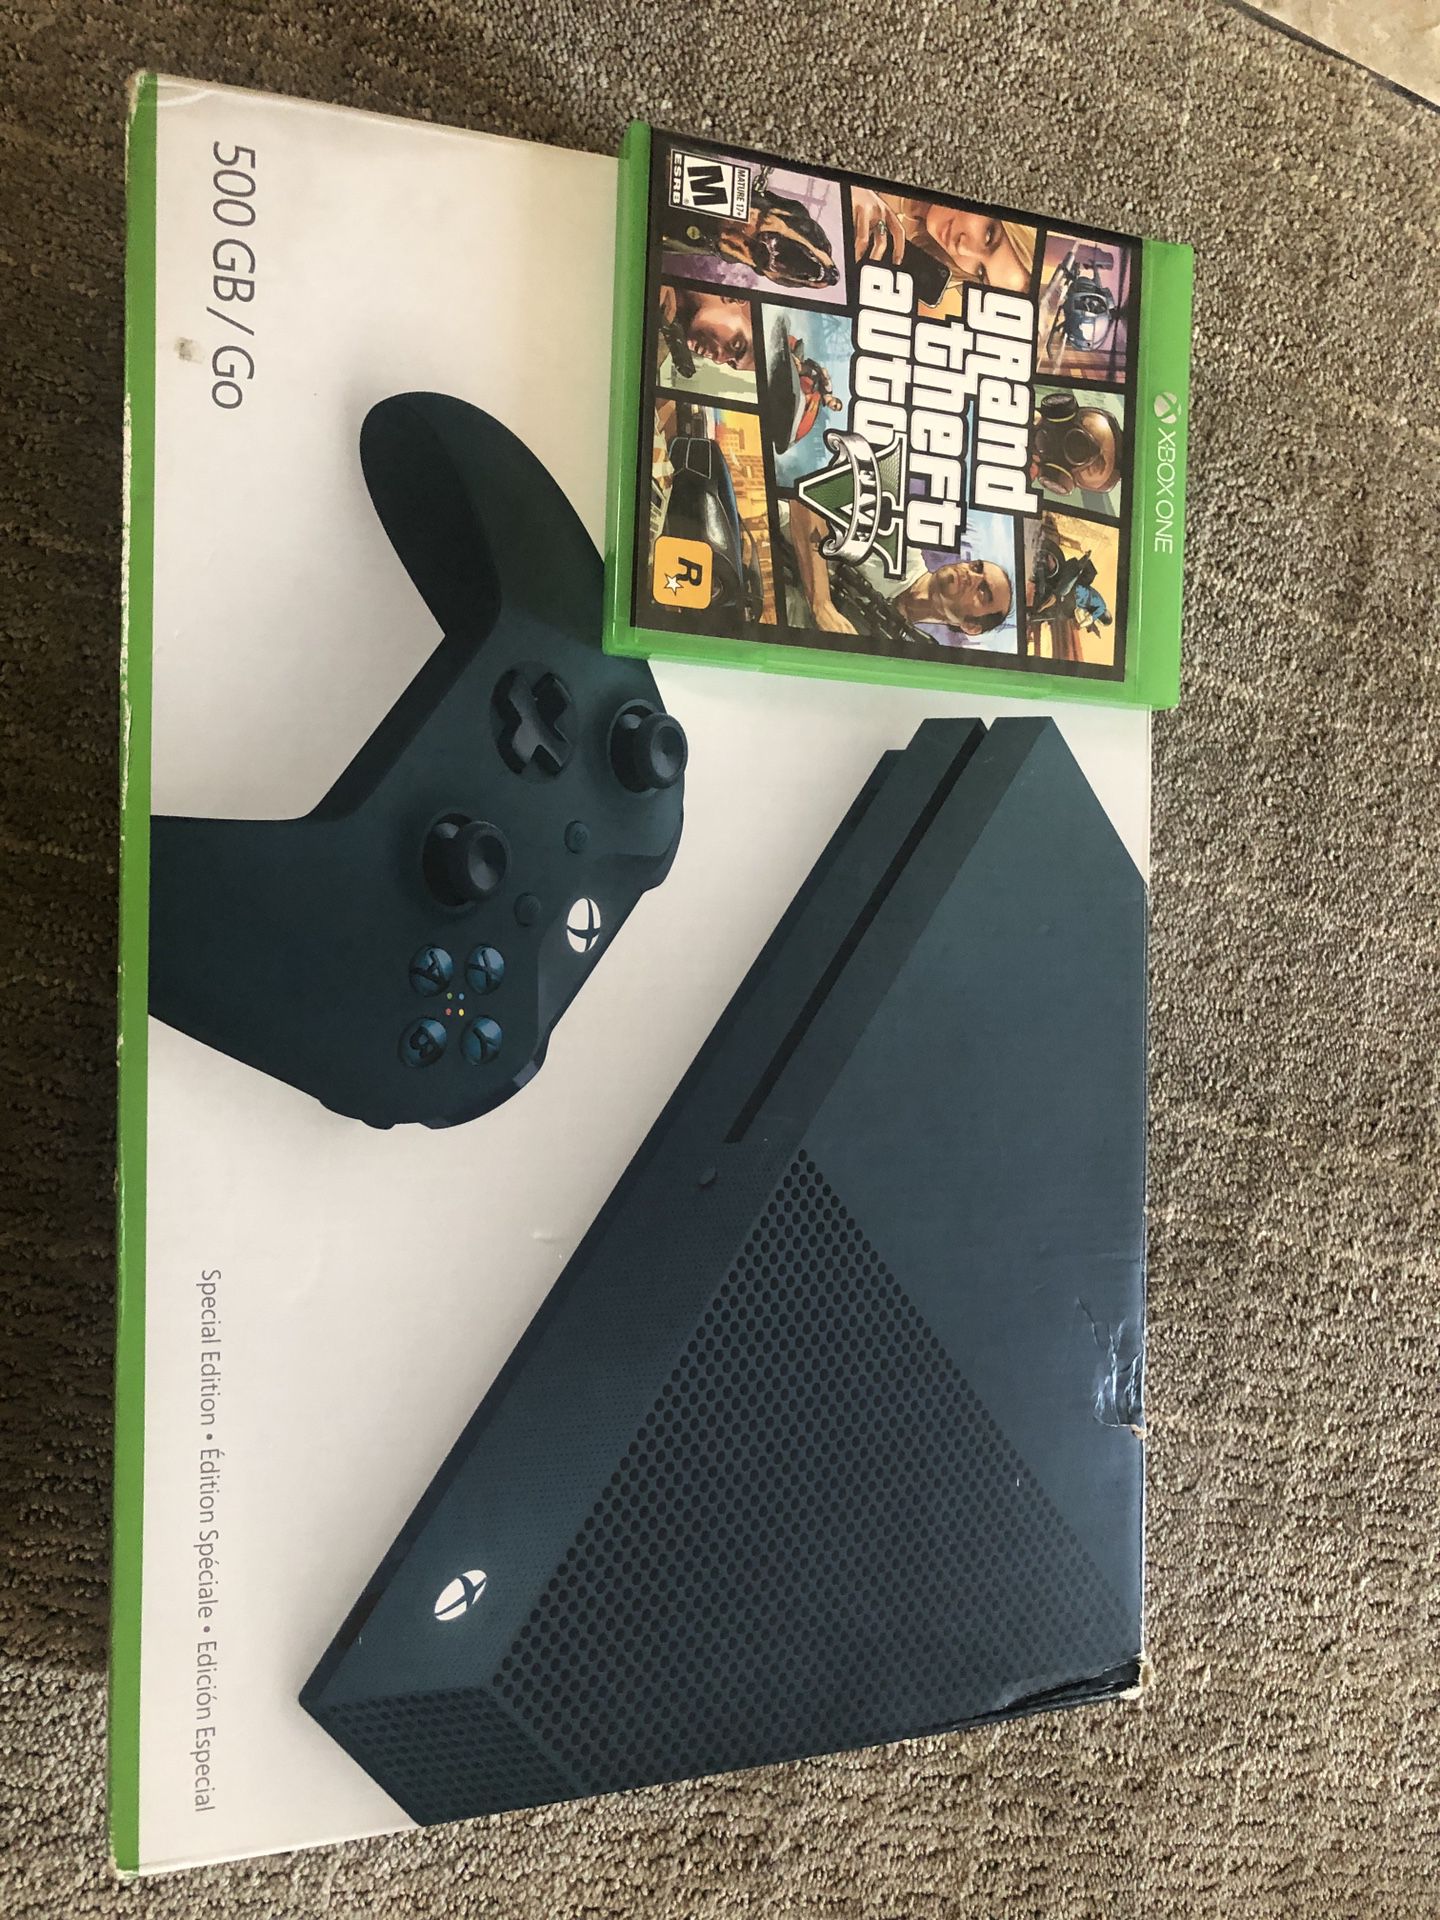 Xbox One (500GB) + Grand Theft Auto V **COMES WITH CABLES**